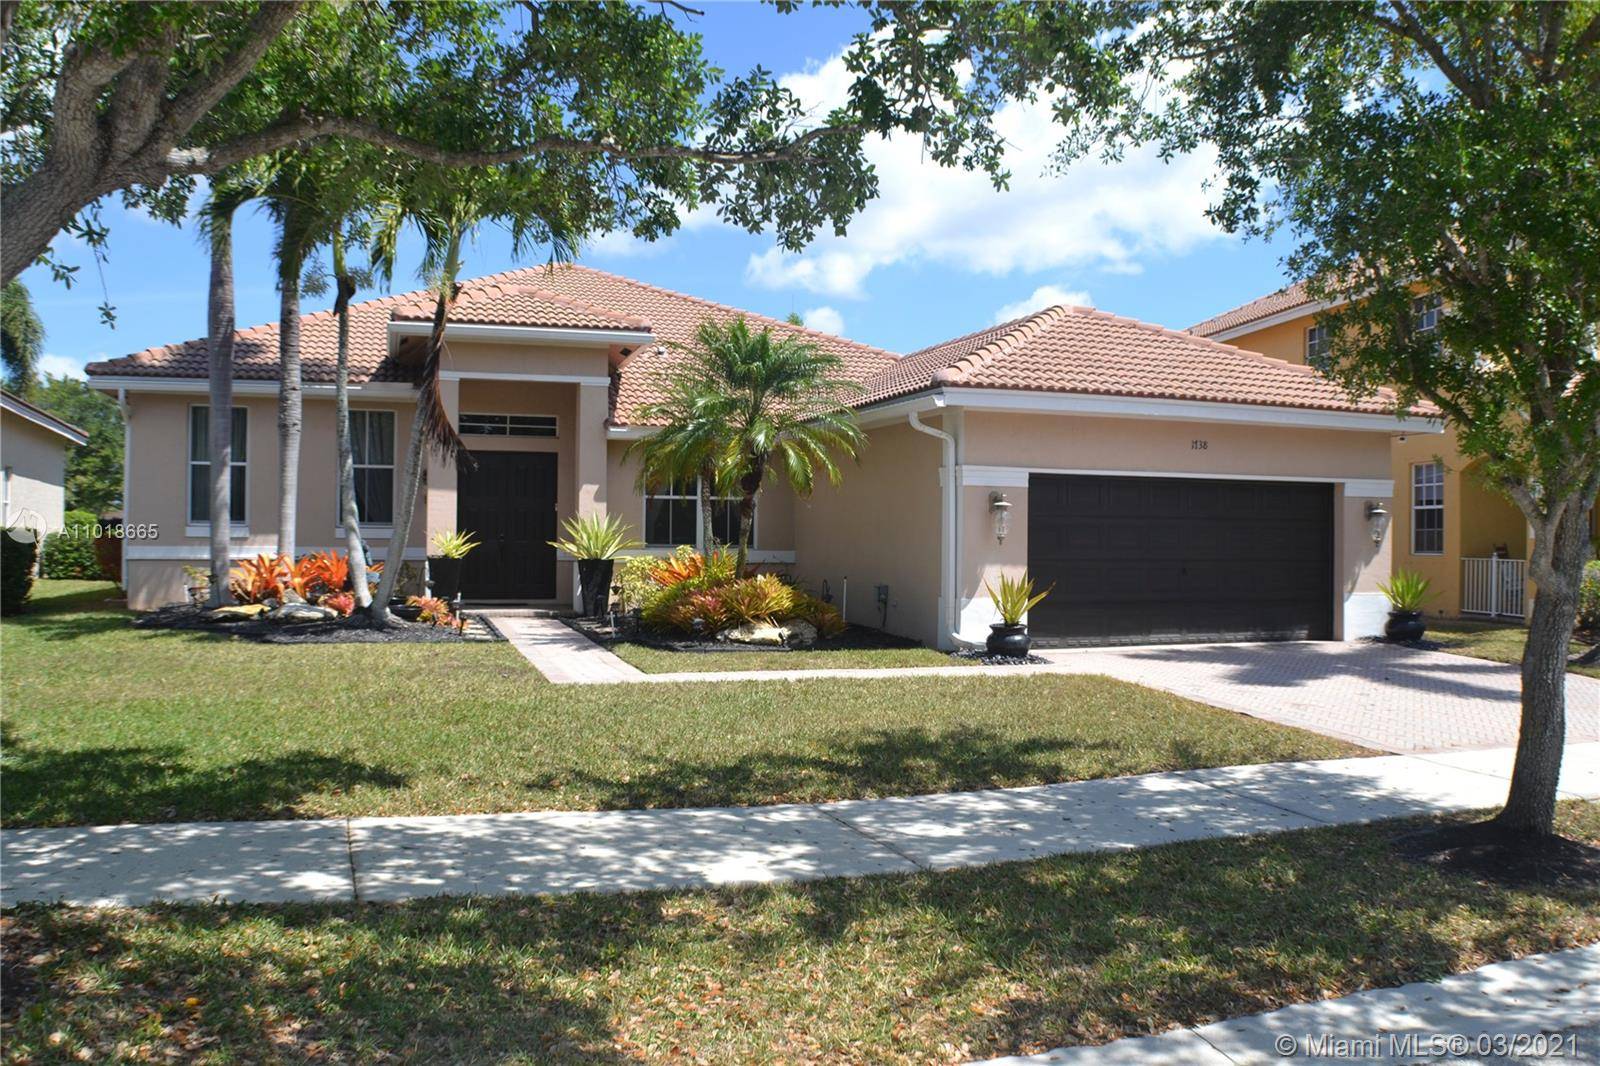 LOCATED IN WESTON PERTIGIOUS SAVANNA, 24 HRS GUARD GATED, BEAUTIFUL HOUSE ONLY ONE STORY, 4 BEDROOMS, 2 AND 1 2 BATHS, LAKEFRONT, FEATURES LUXURIOUS FINISHES THROUGHOUT.